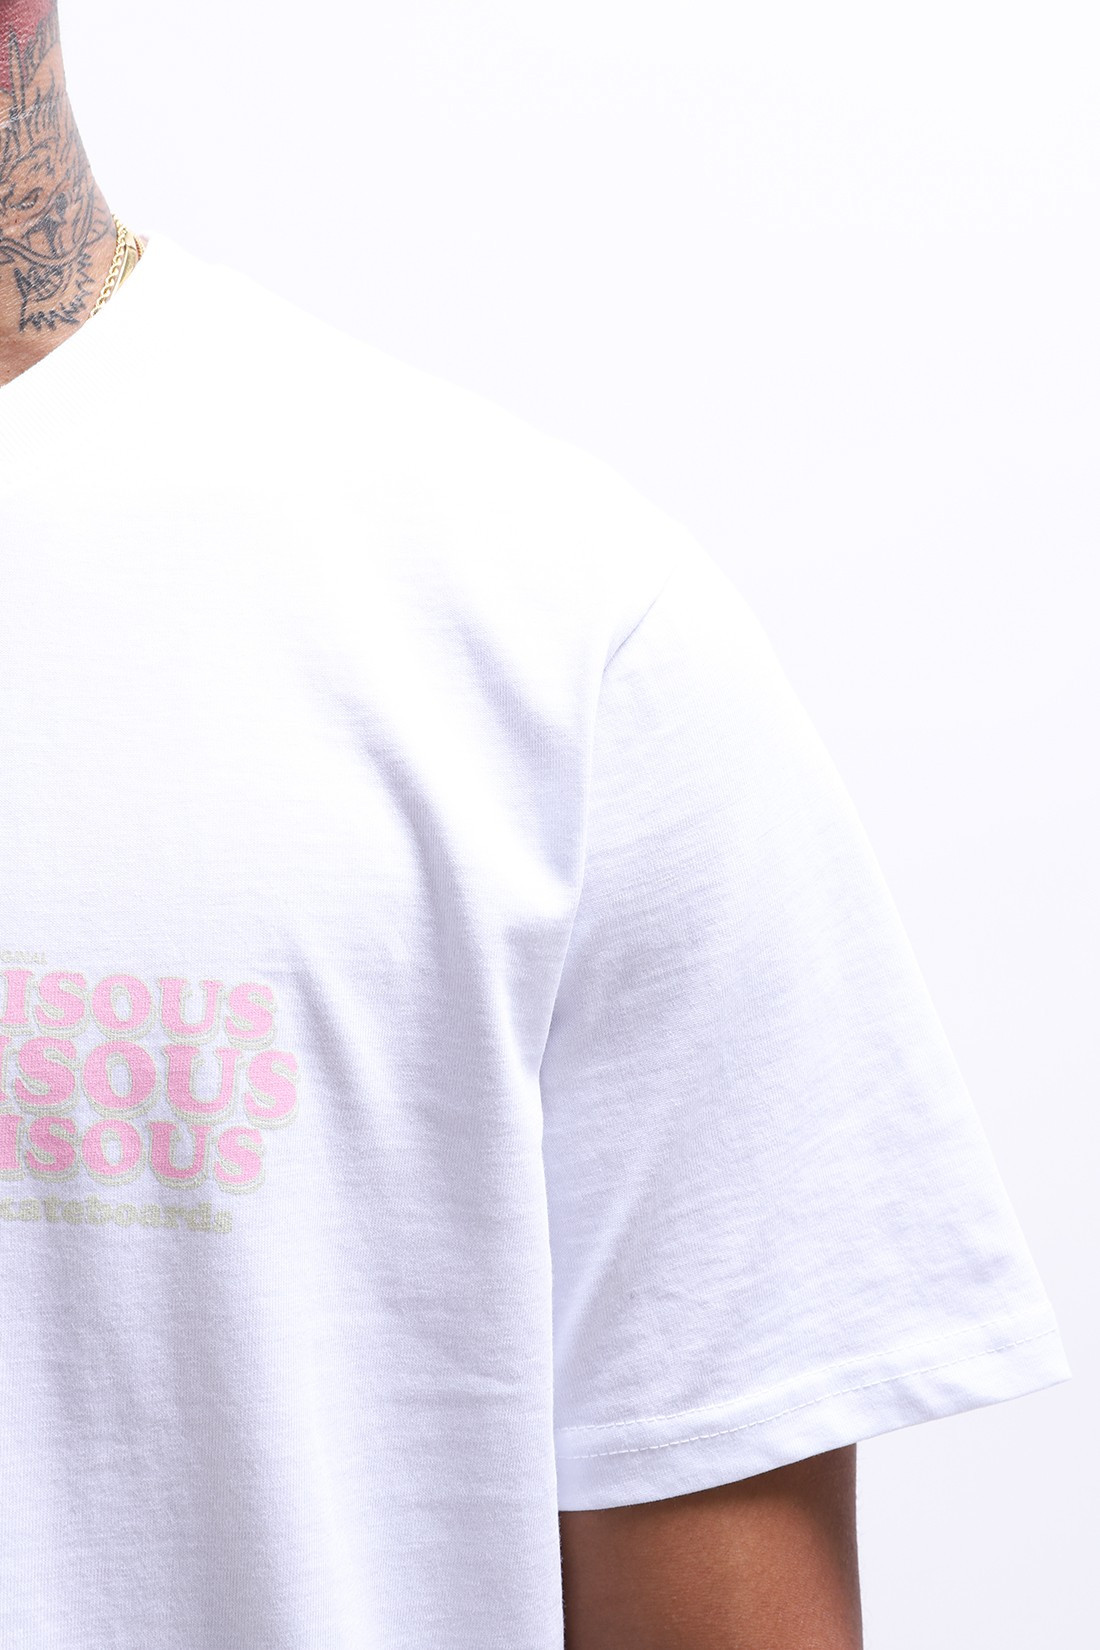 BISOUS SKATEBOARDS / T-shirt grease white White